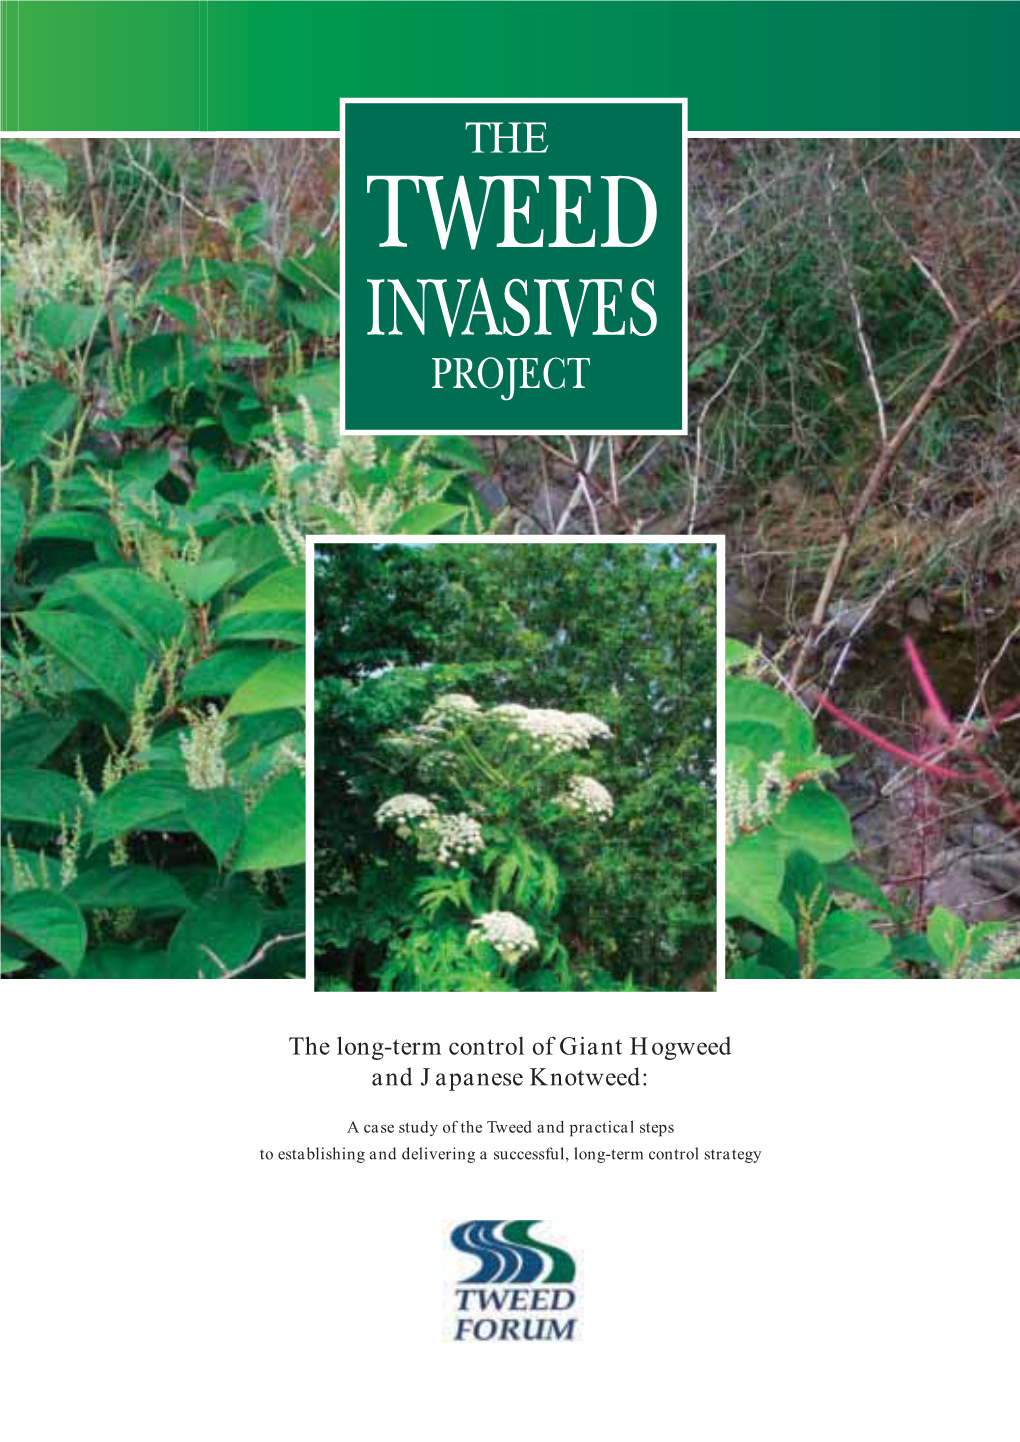 The Long-Term Control of Giant Hogweed and Japanese Knotweed